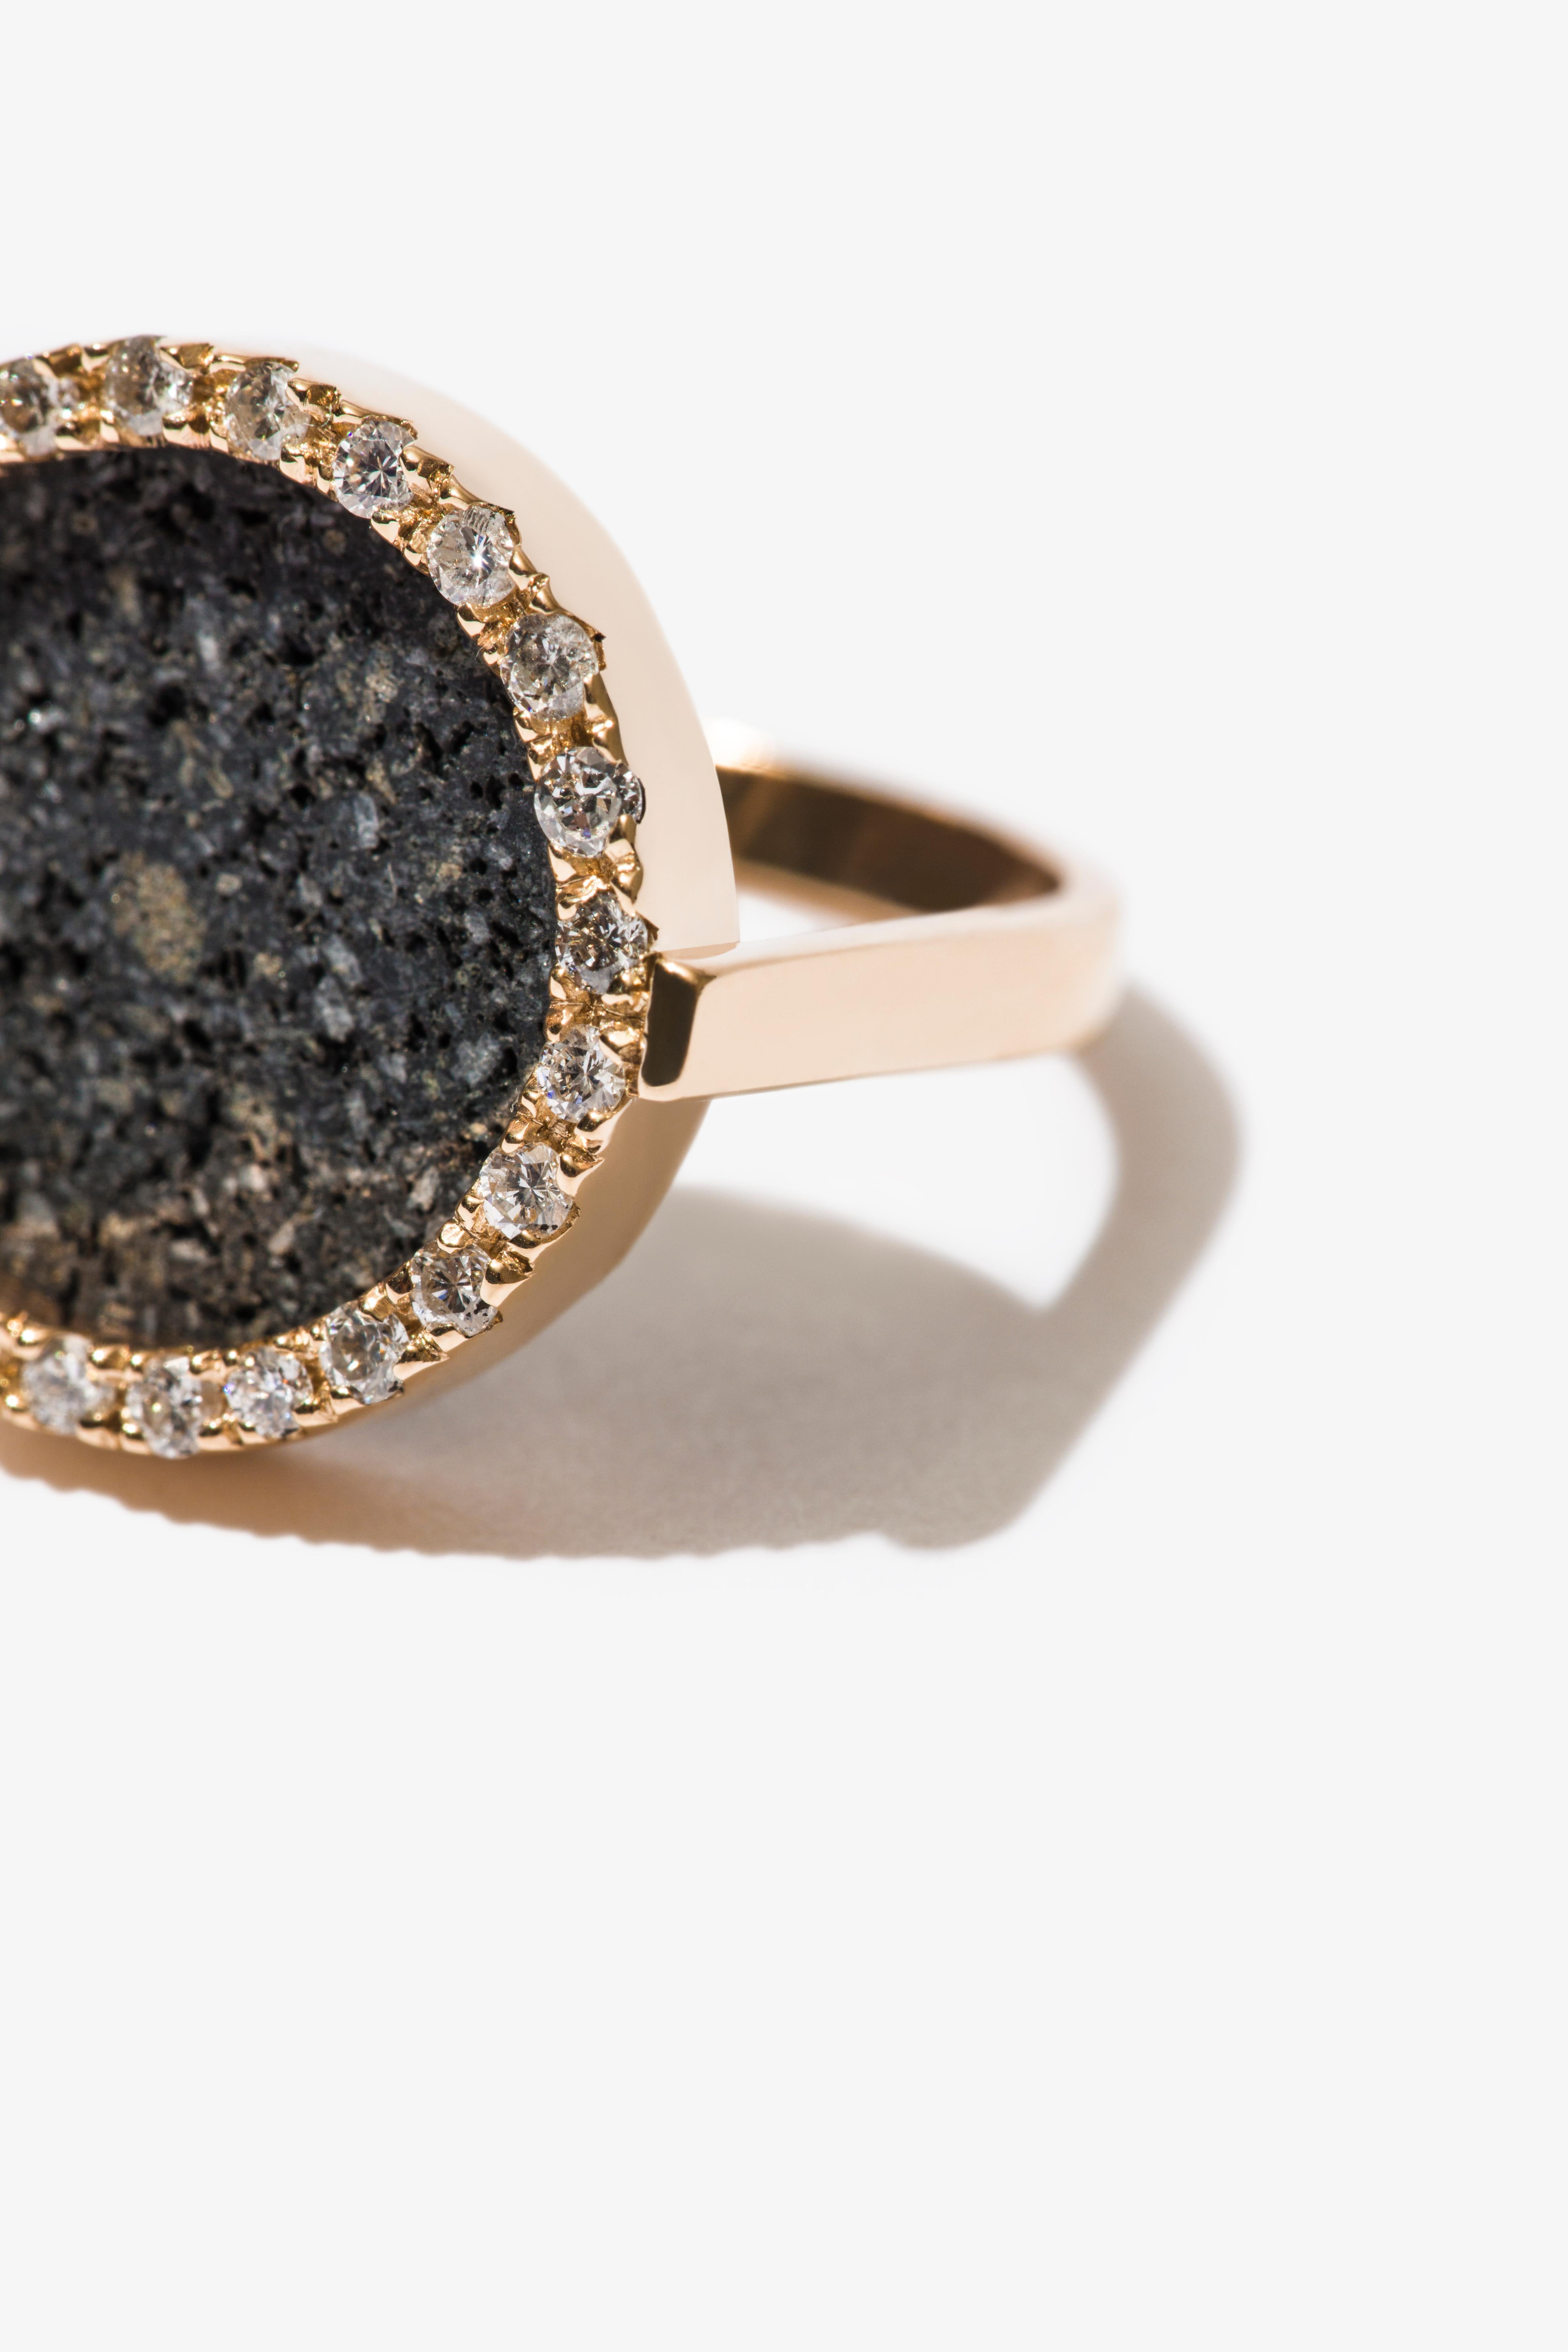 Unexpected combination of Lava stone from Mexico's Popocatepetl Volcano, recycled 14-Karat Yellow Gold and  Shimmering White Diamonds.
Made by hand at our Mexico City atelier.
The collection juxtaposes bold and organic lines, invoking a dialogue